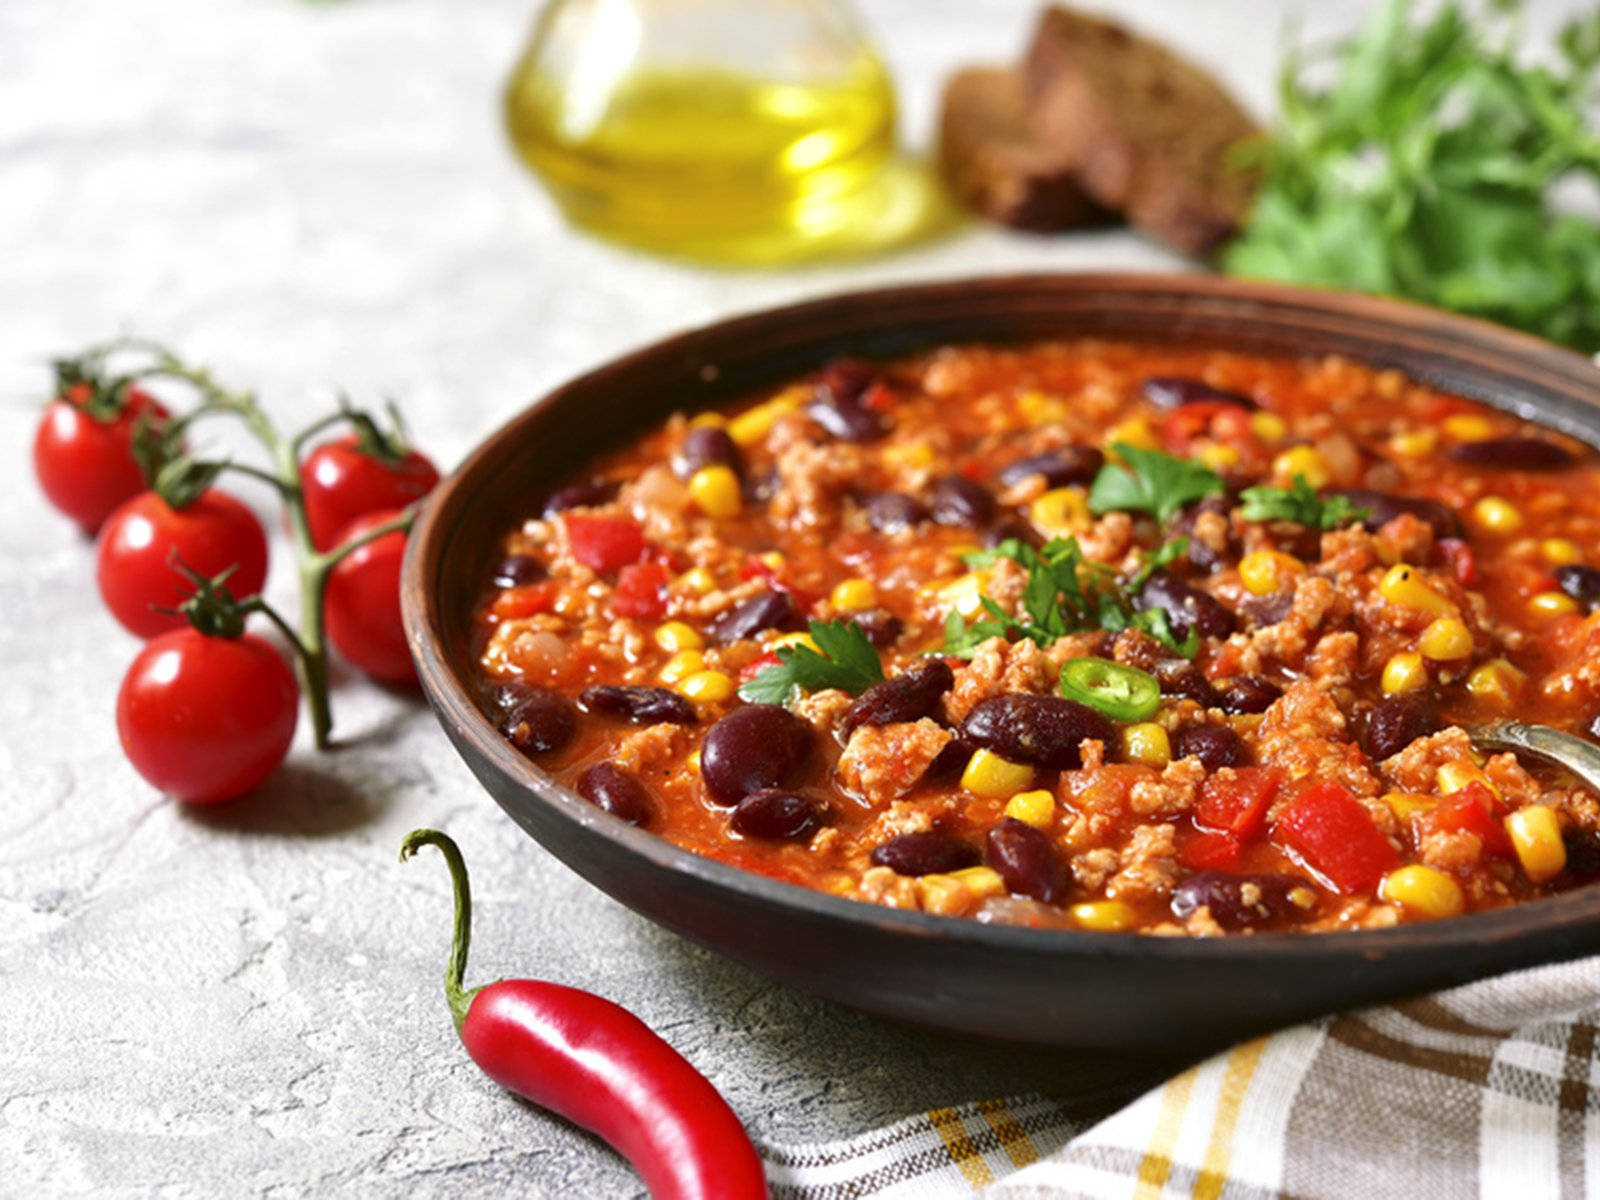 Succulent Chili Con Carne with Fresh Ingredients Wallpaper